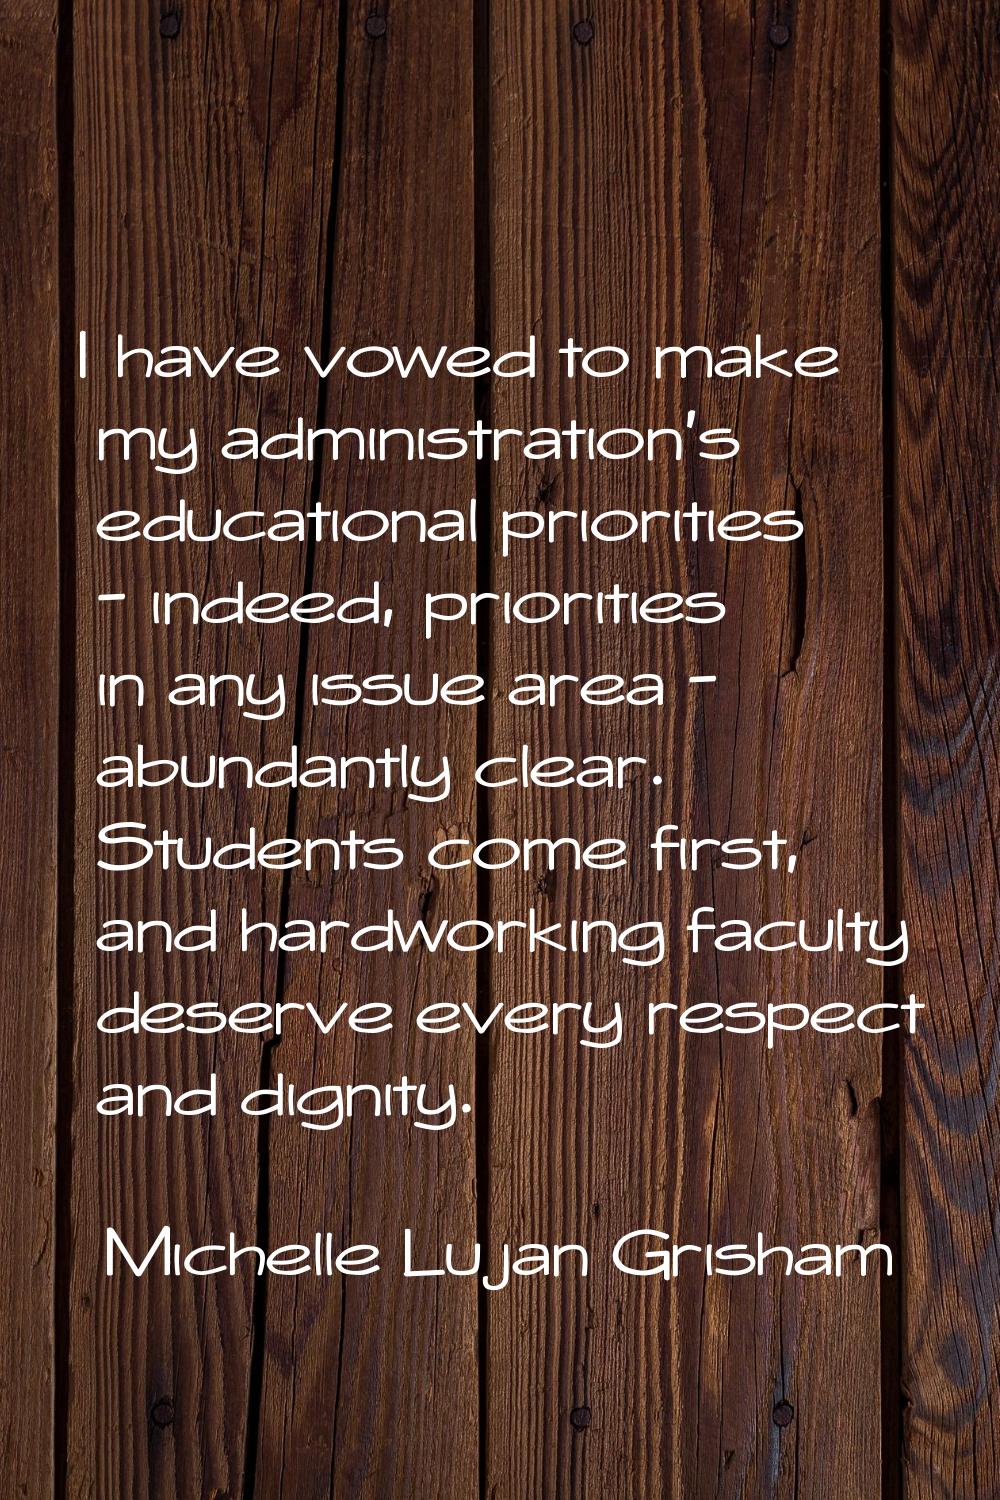 I have vowed to make my administration's educational priorities - indeed, priorities in any issue a